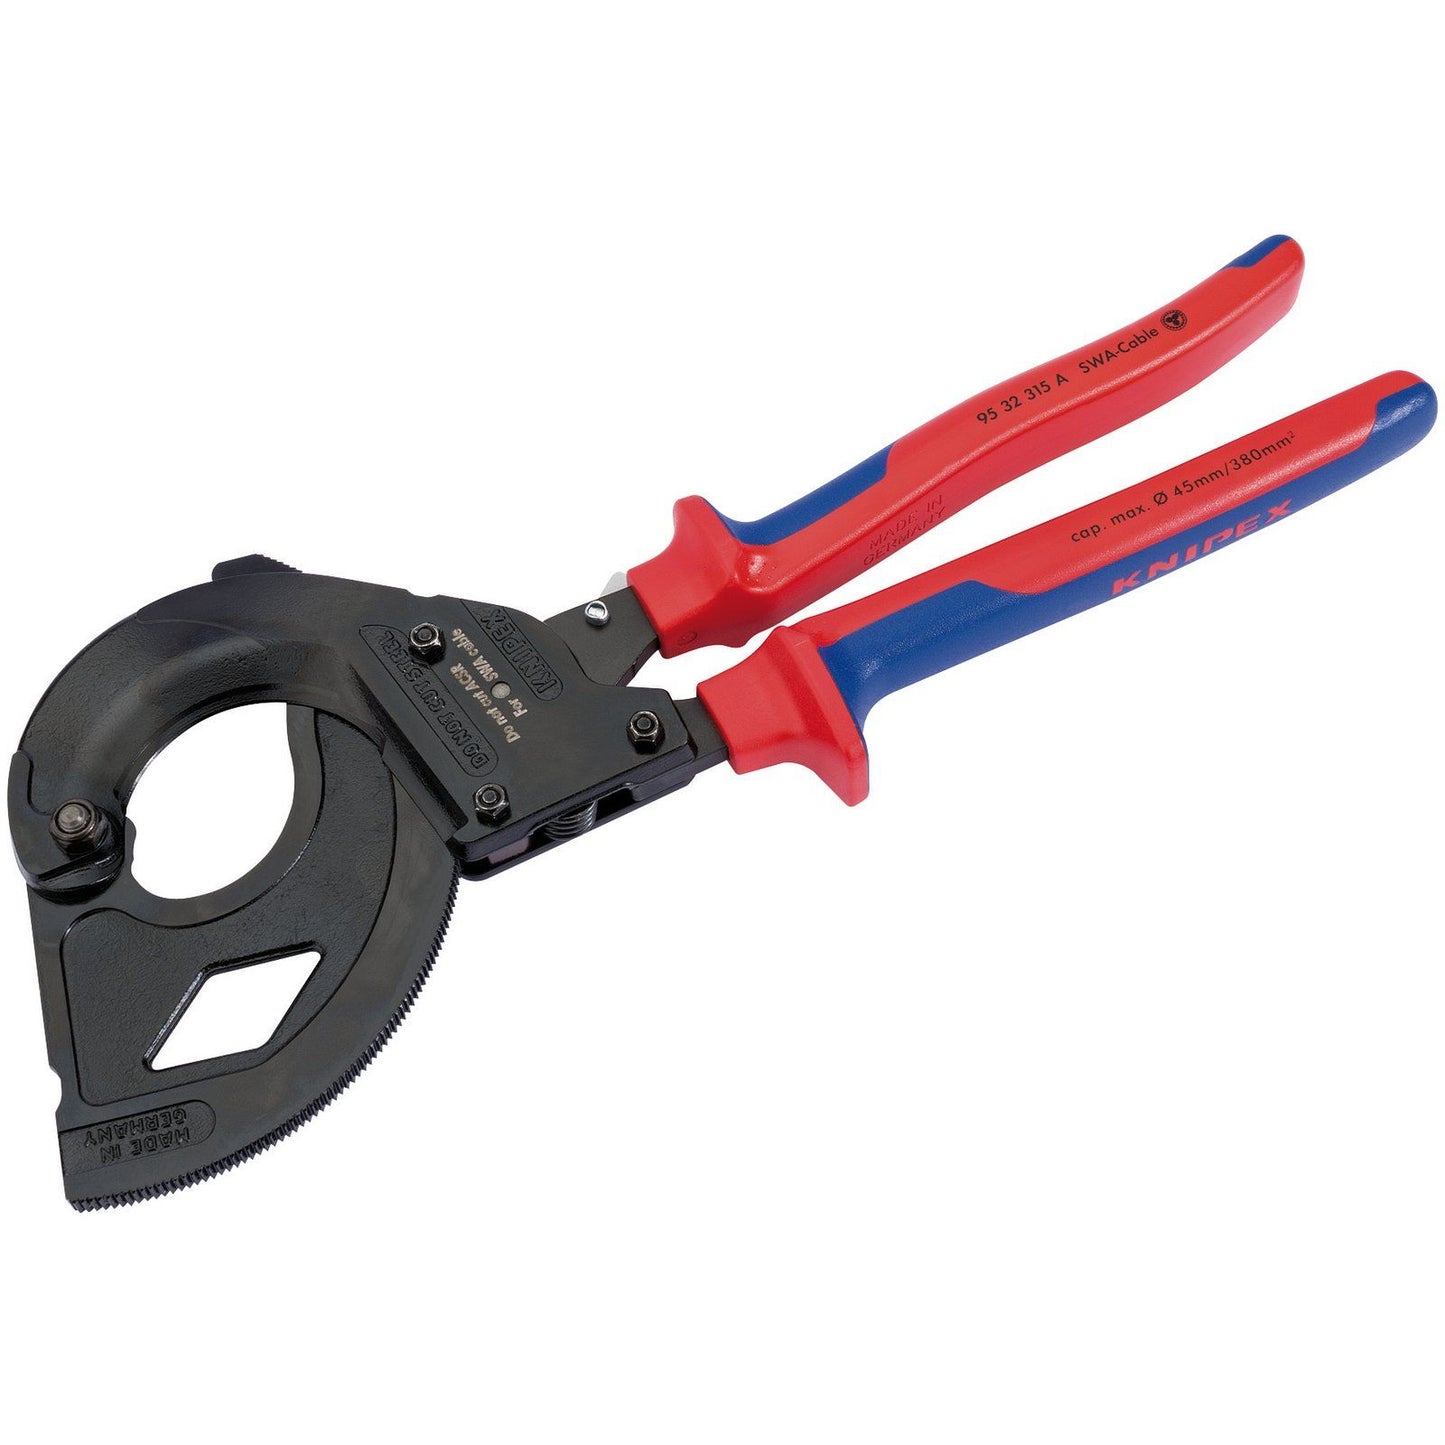 Knipex Knipex 95 32 315A 315mm Ratchet Action Cable Cutter For SWA Cable - 82575